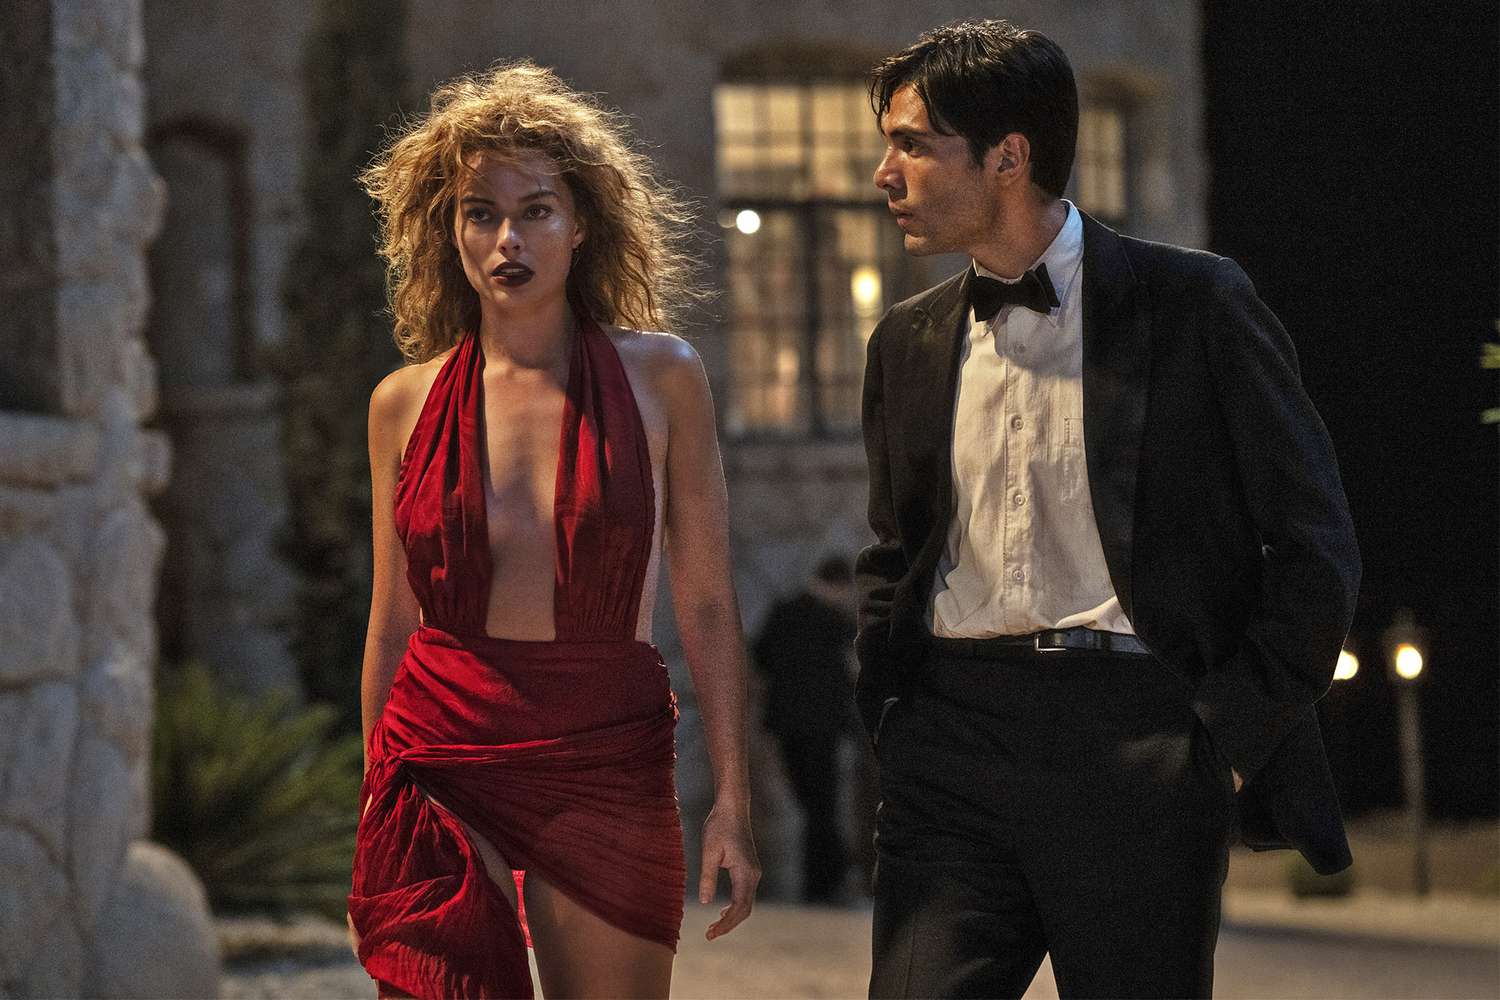 Margot Robbie plays Nellie LaRoy and Diego Calva plays Manny Torres in Babylon from Paramount Pictures.